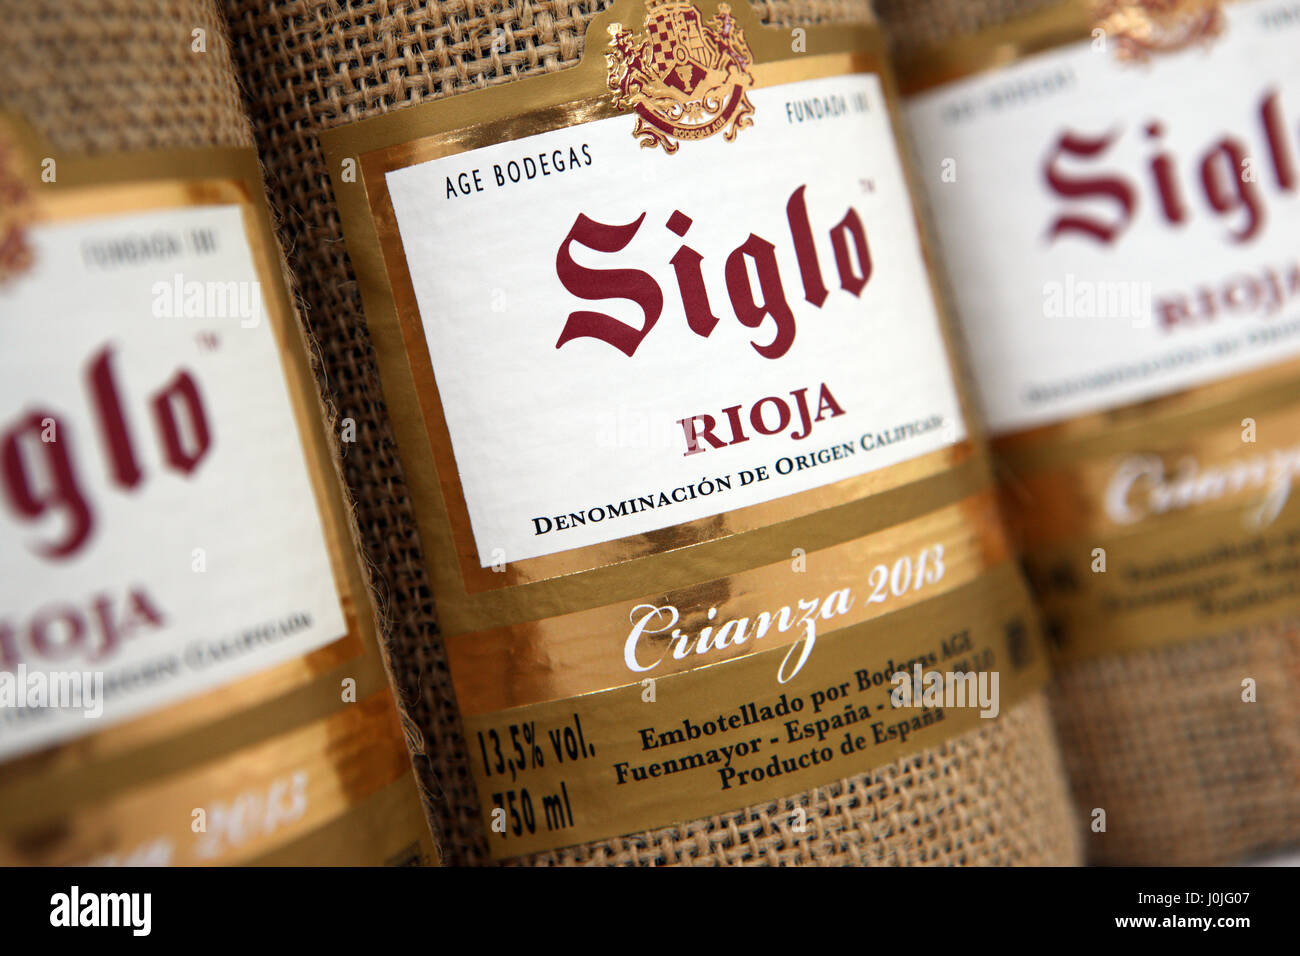 Bottles of Spanish Rioja from the Siglo winery Stock Photo